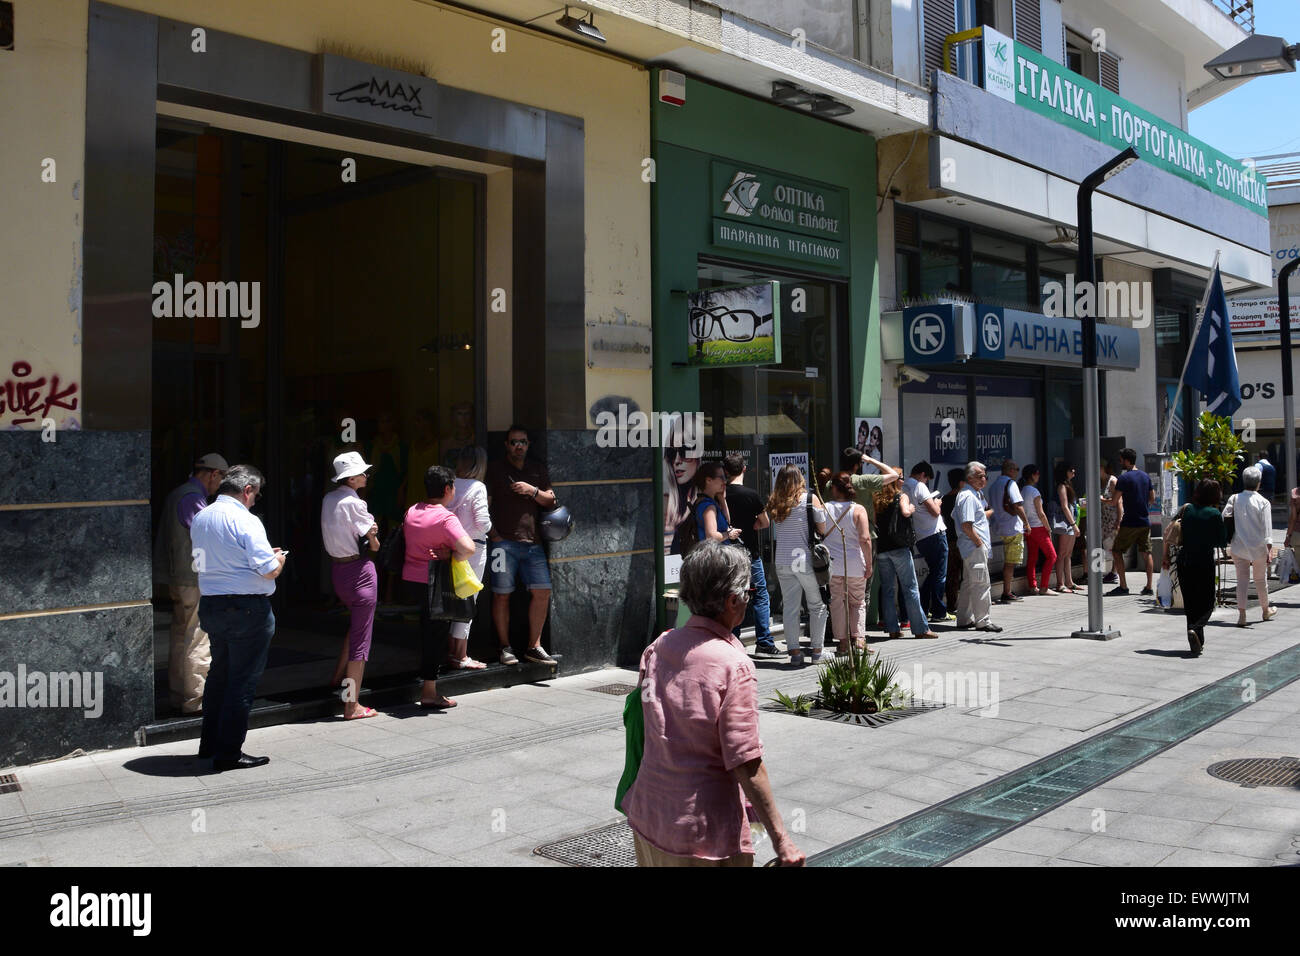 Long queue of people wait for money from ATM cashpoint. Banks are closed after bank run and capital controls are implemented. Stock Photo